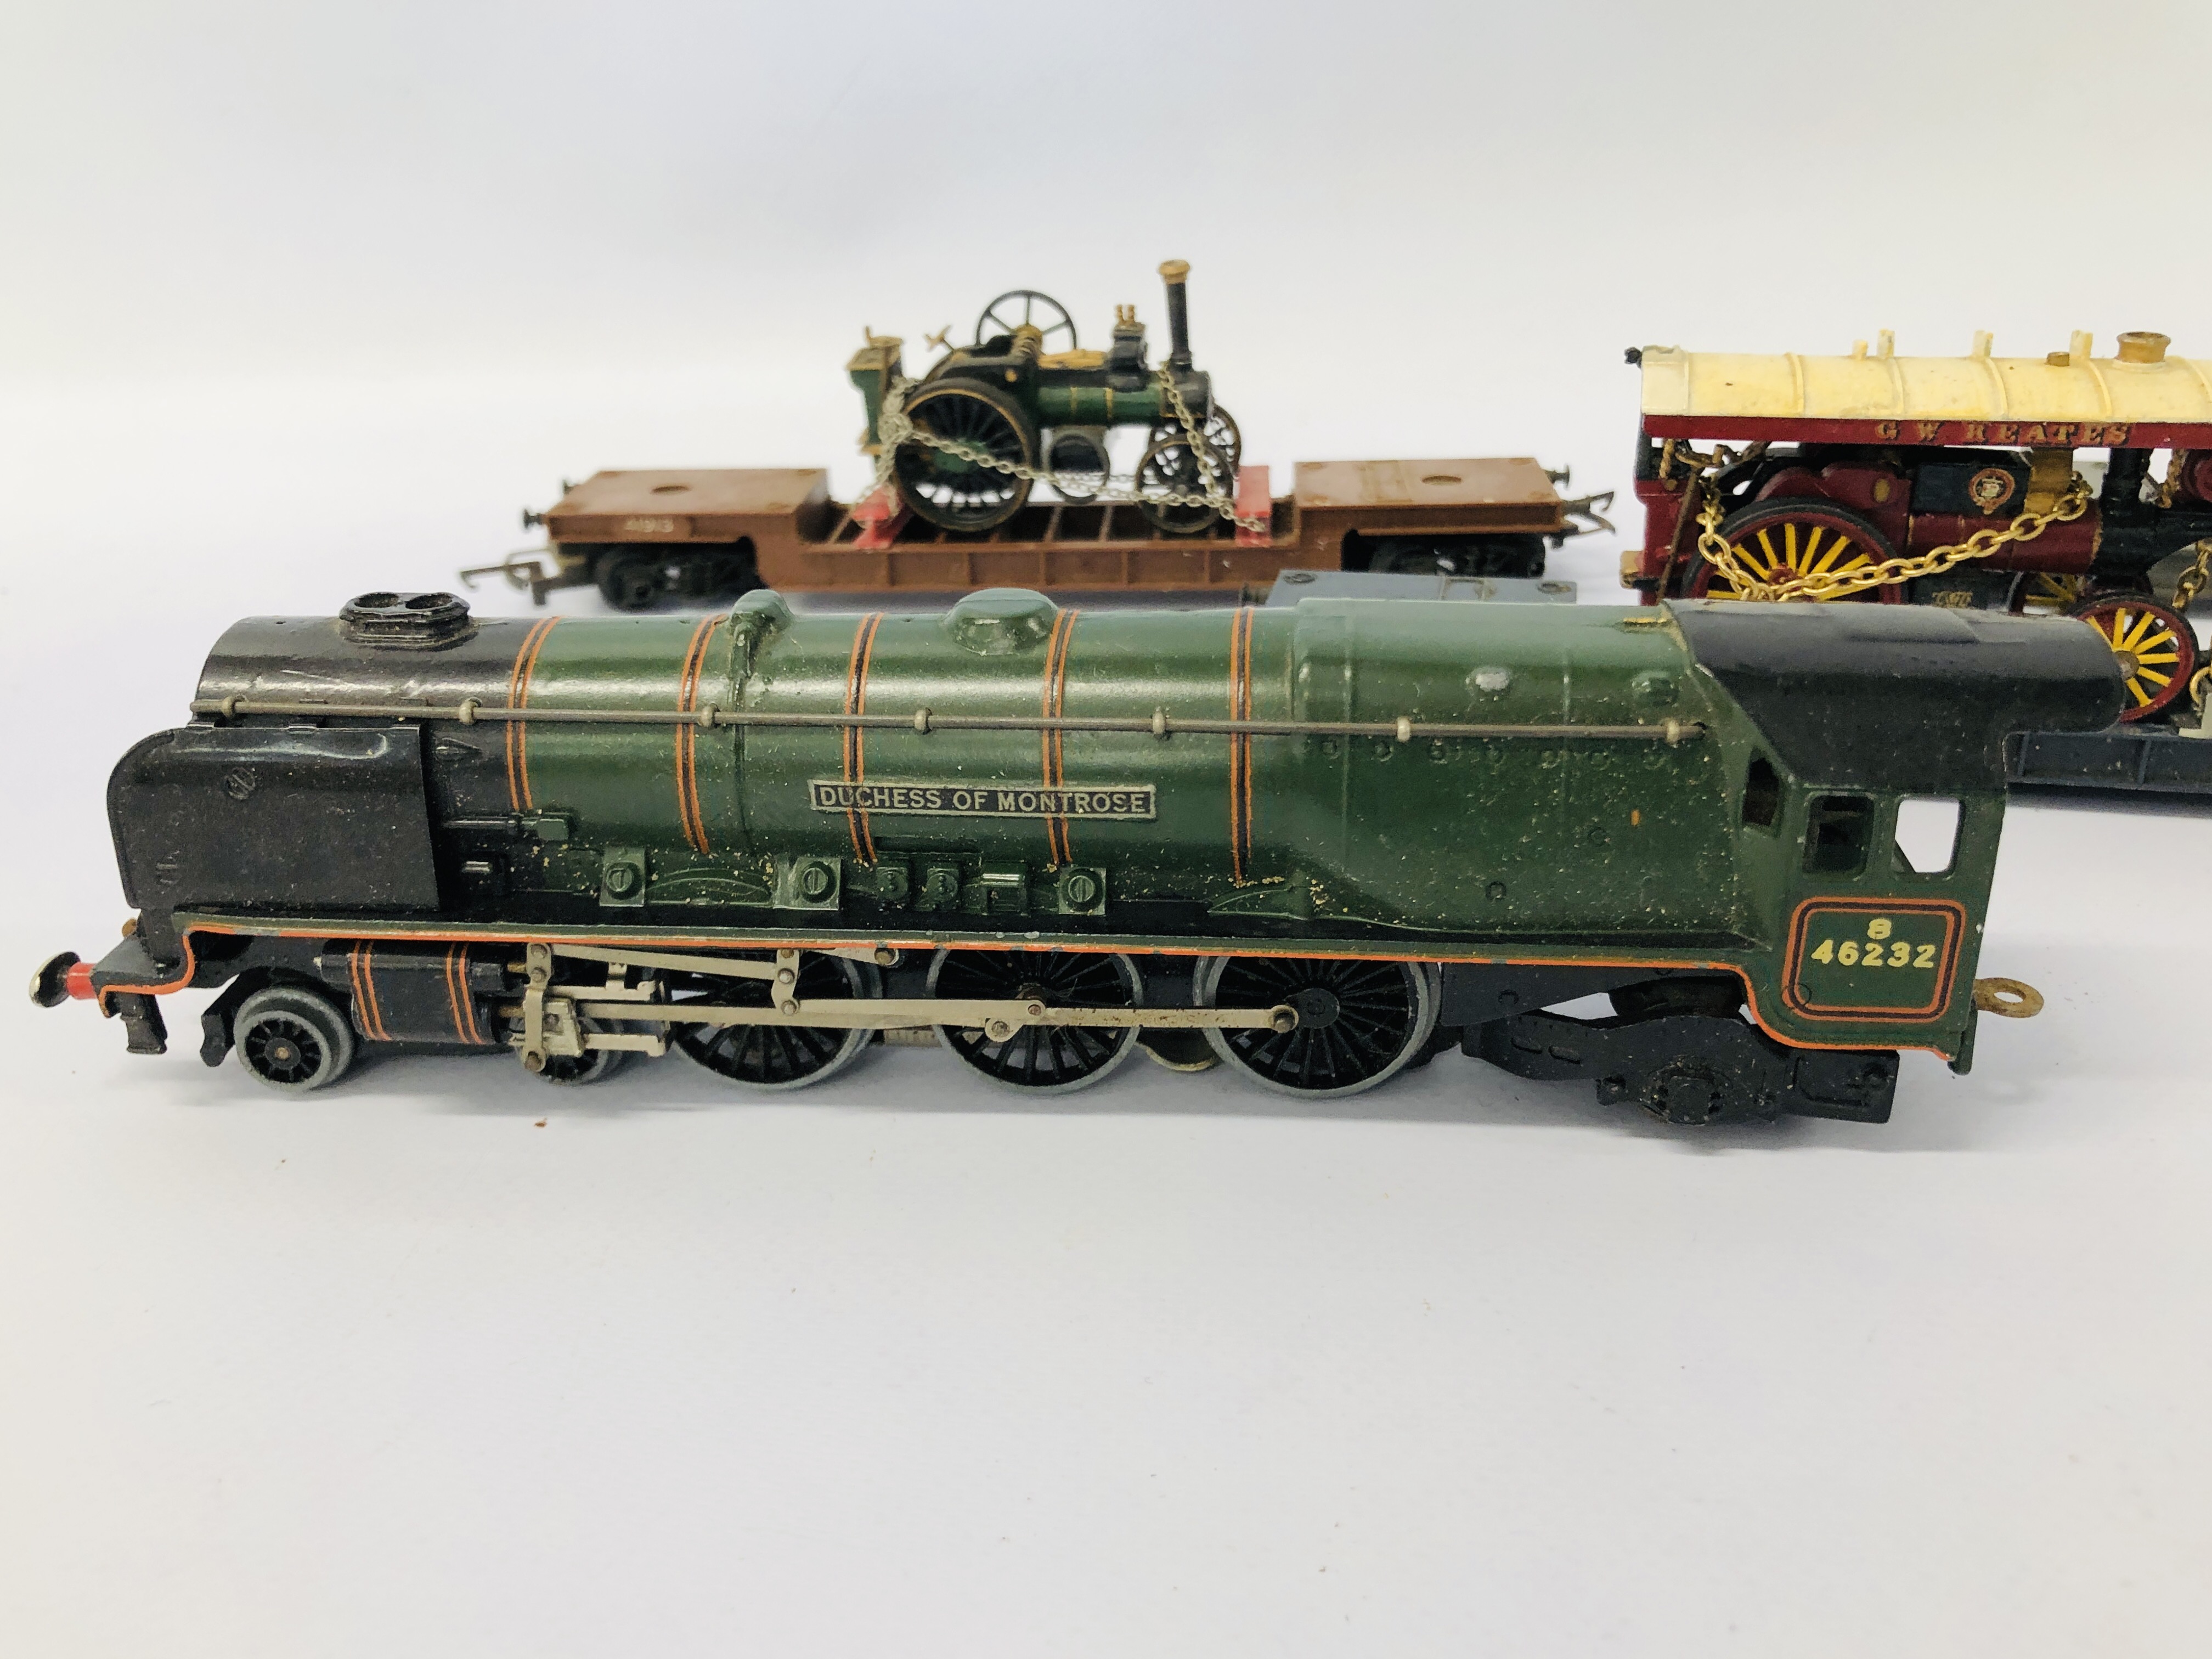 A HORNBY DUBO MECCANO 00 GAUGE DUCHESS OF MONTROSE LOCOMOTIVE & 3 TRIANG 00 GAUGE WAGONS WITH CARGO - Image 2 of 14